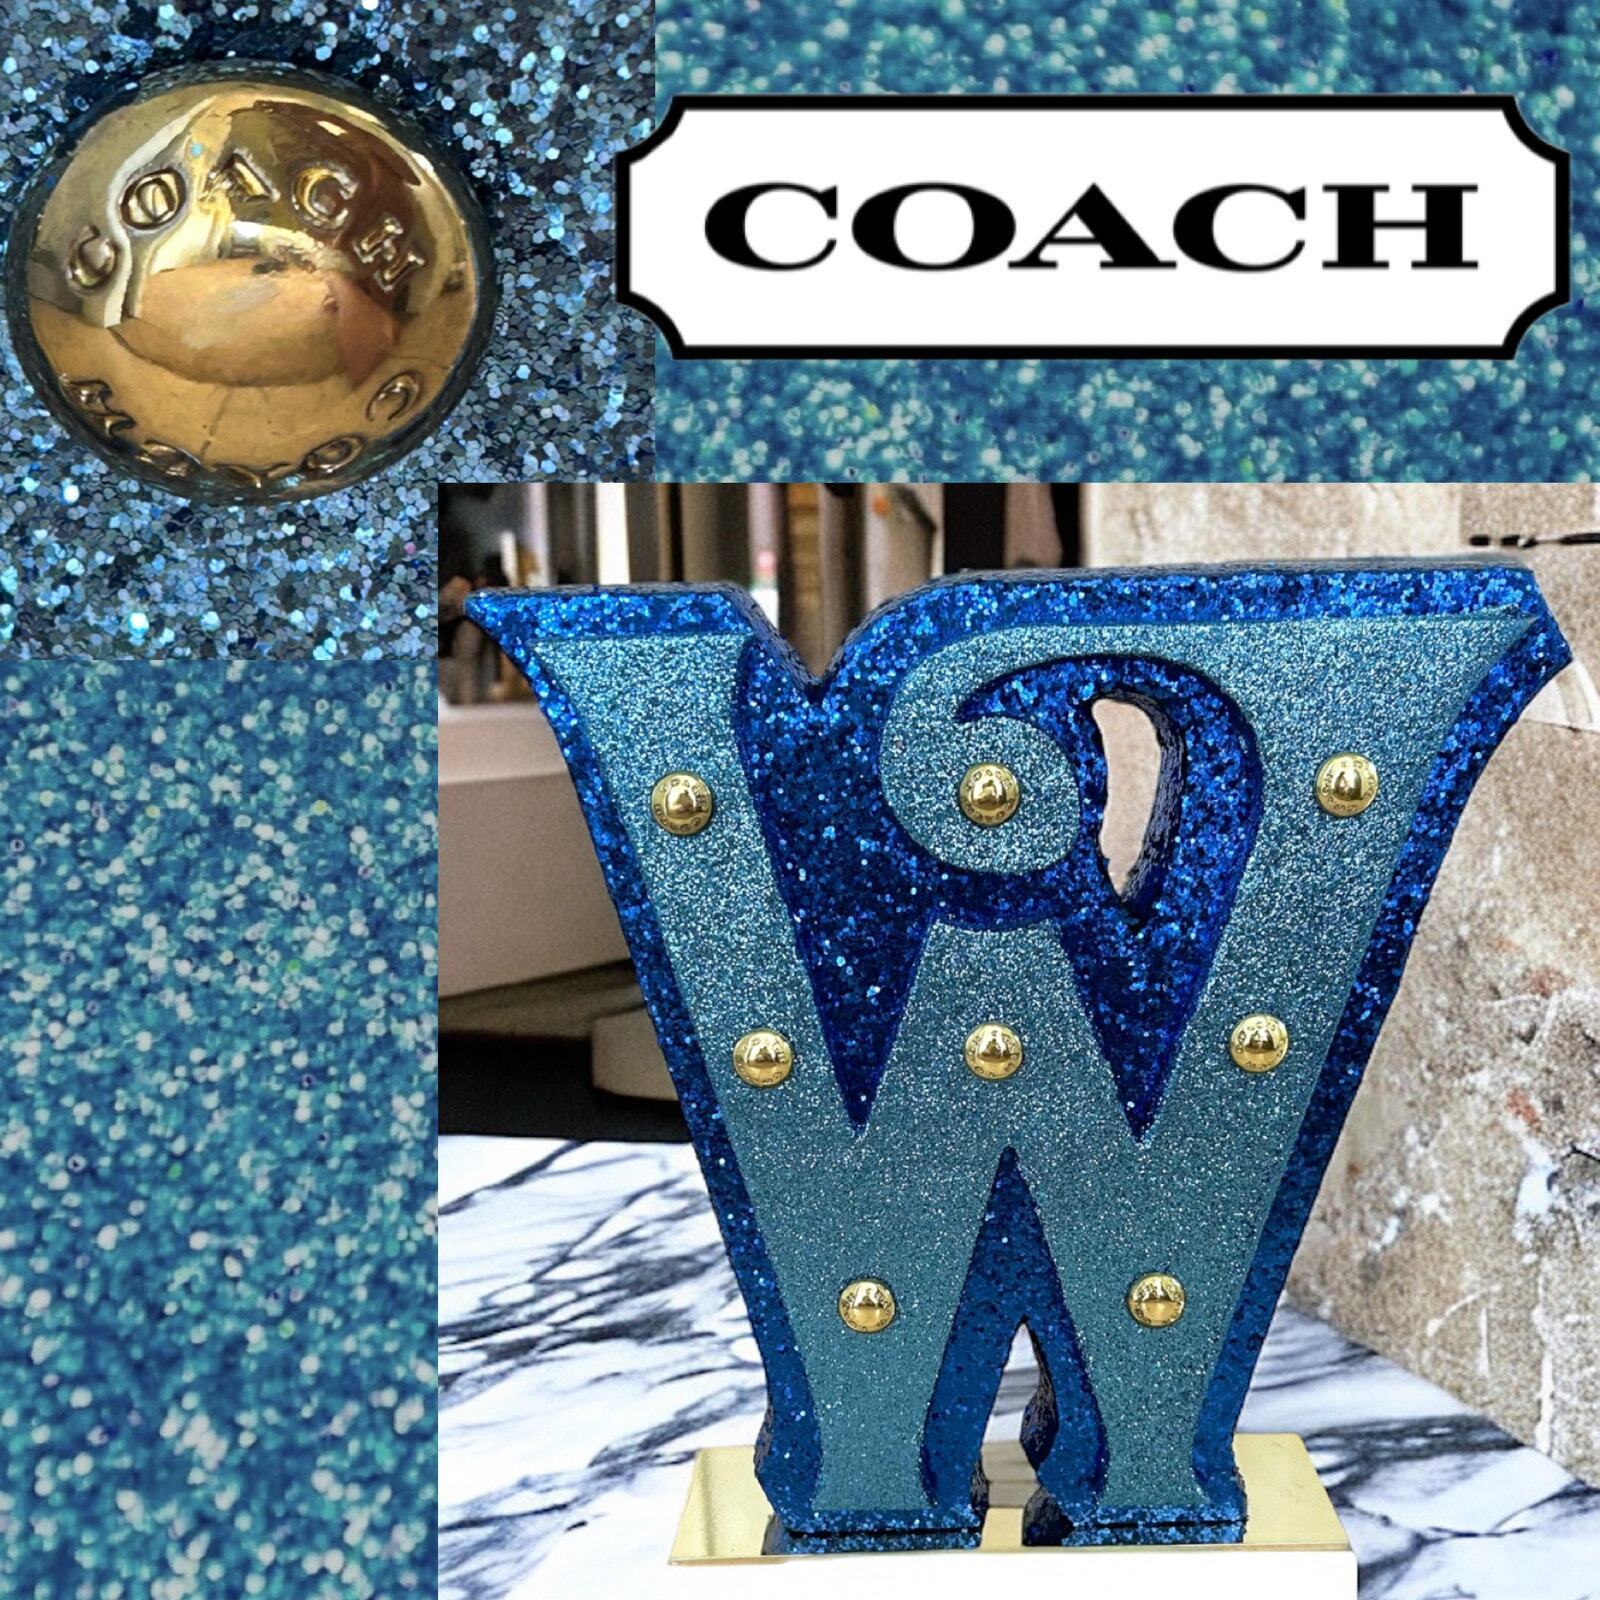 Super RARE COACH STORE DISPLAY Blue with BRASS Coach Studs W Letter Sign Decore